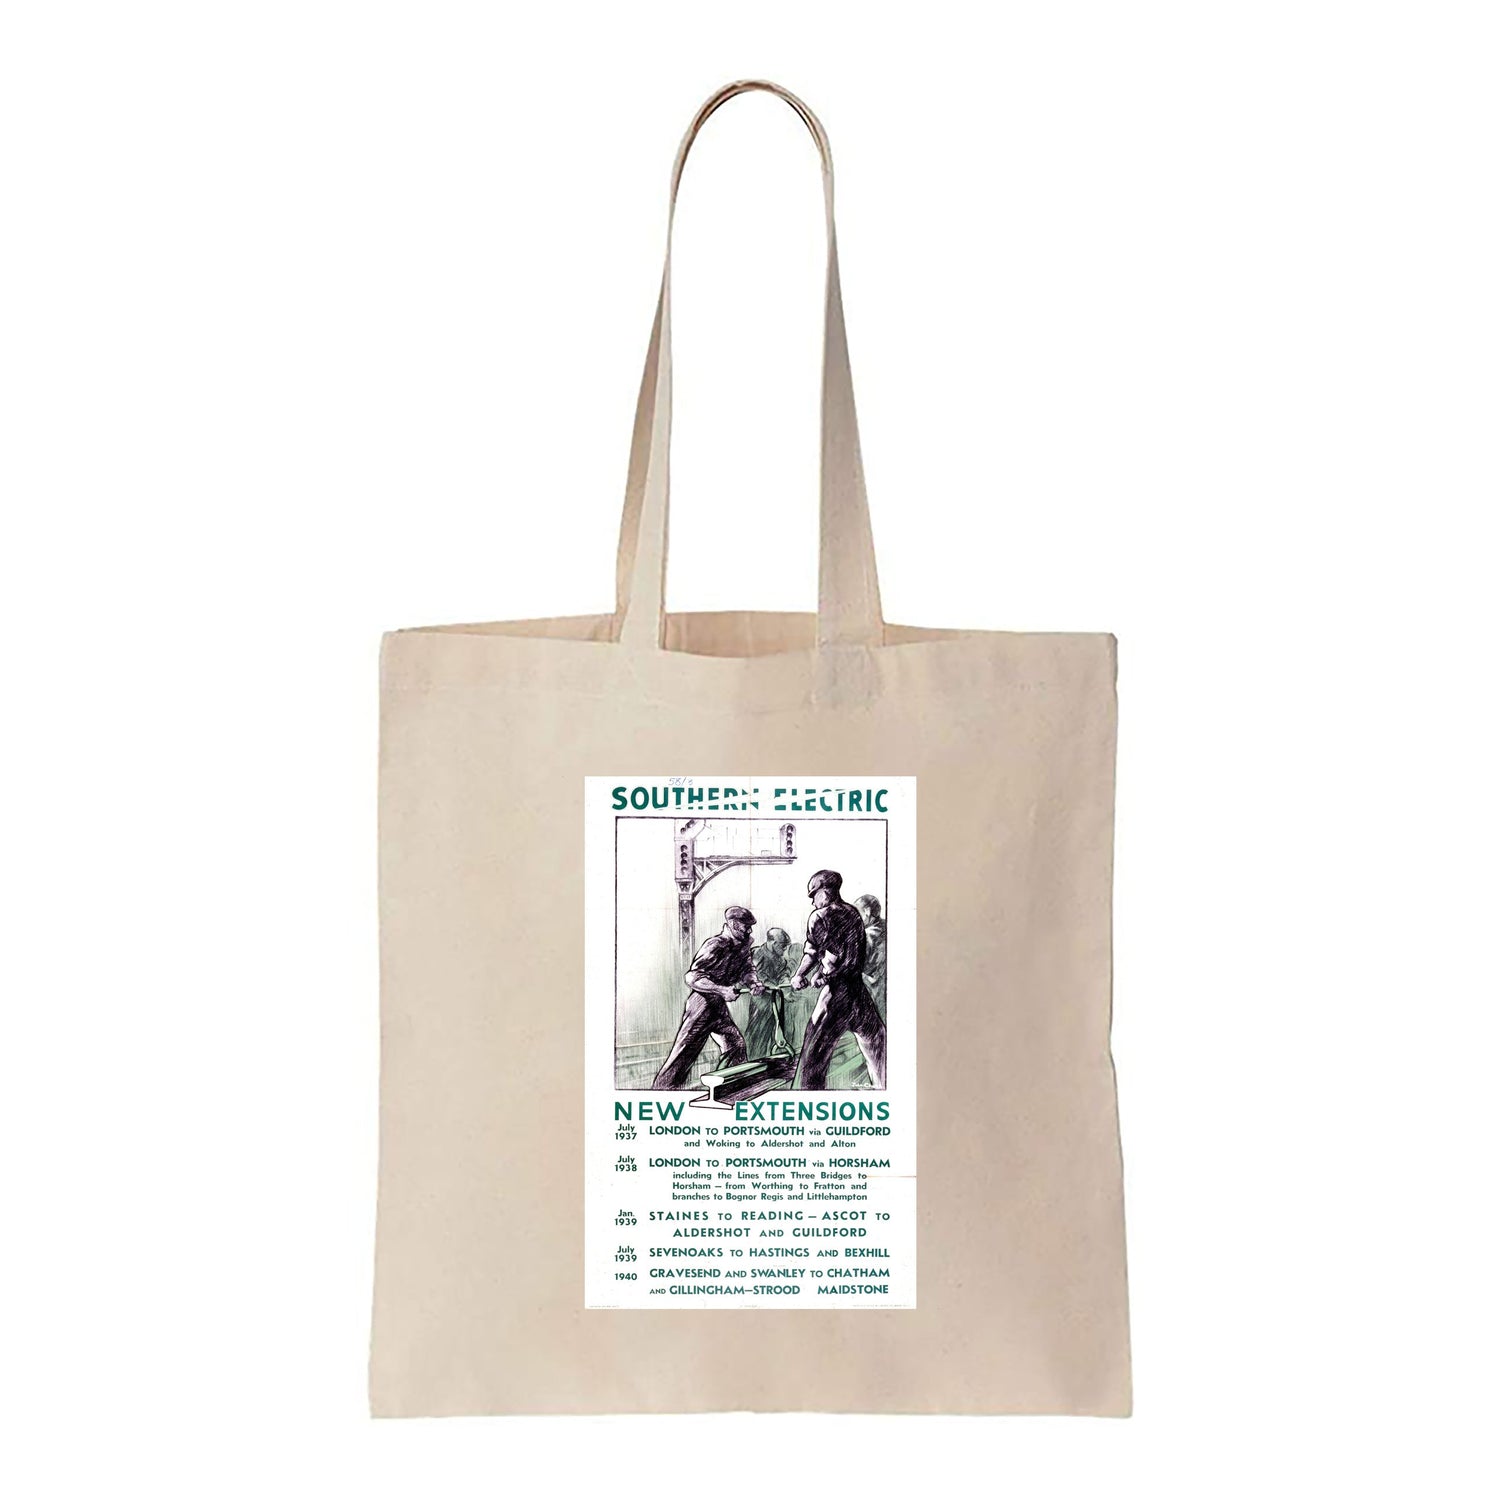 New Extension Dates - Southern Electric - Canvas Tote Bag